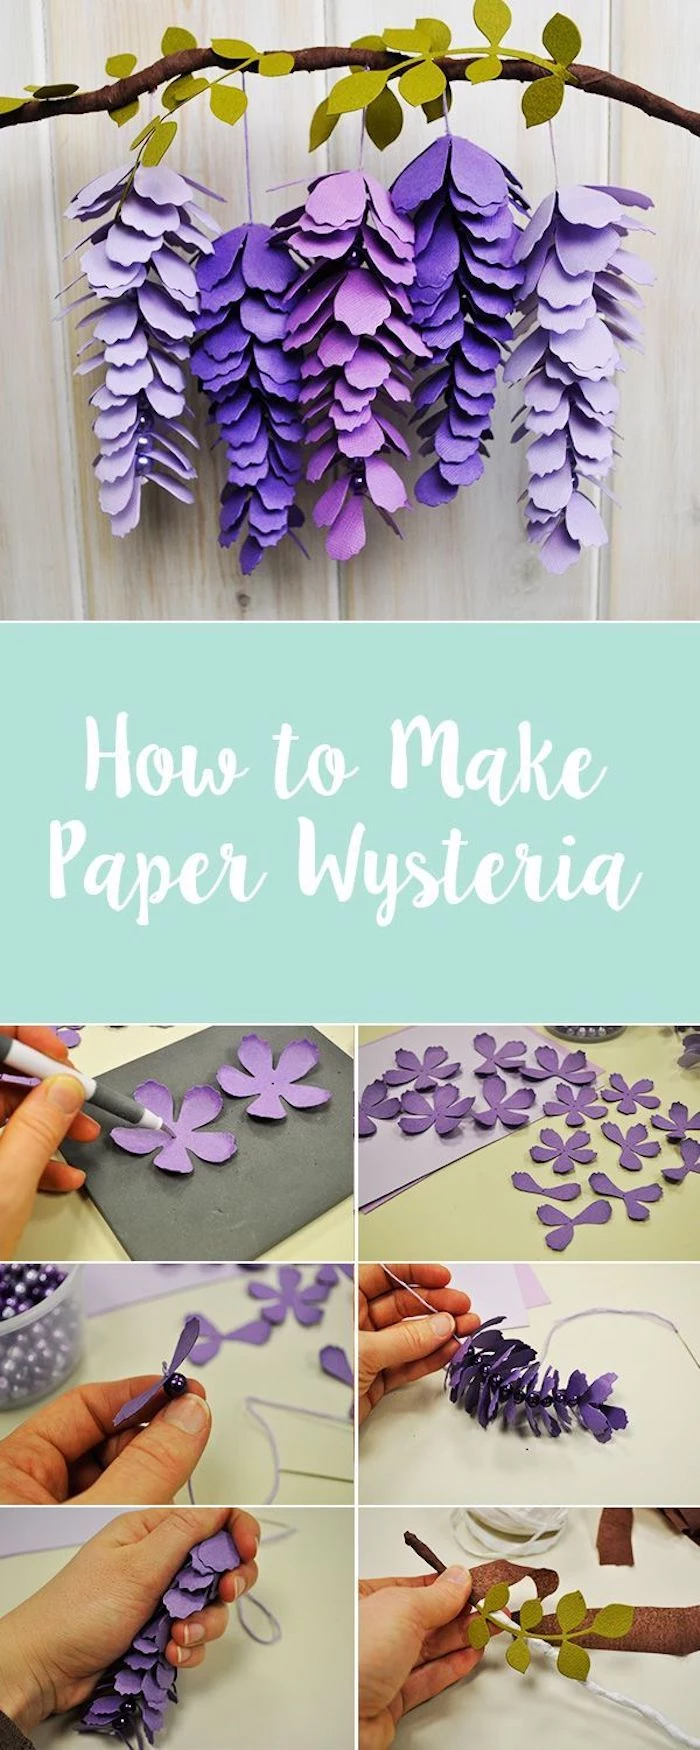 how to make paper wysteria, paper flower decorations, photo collage of step by step diy tutorial